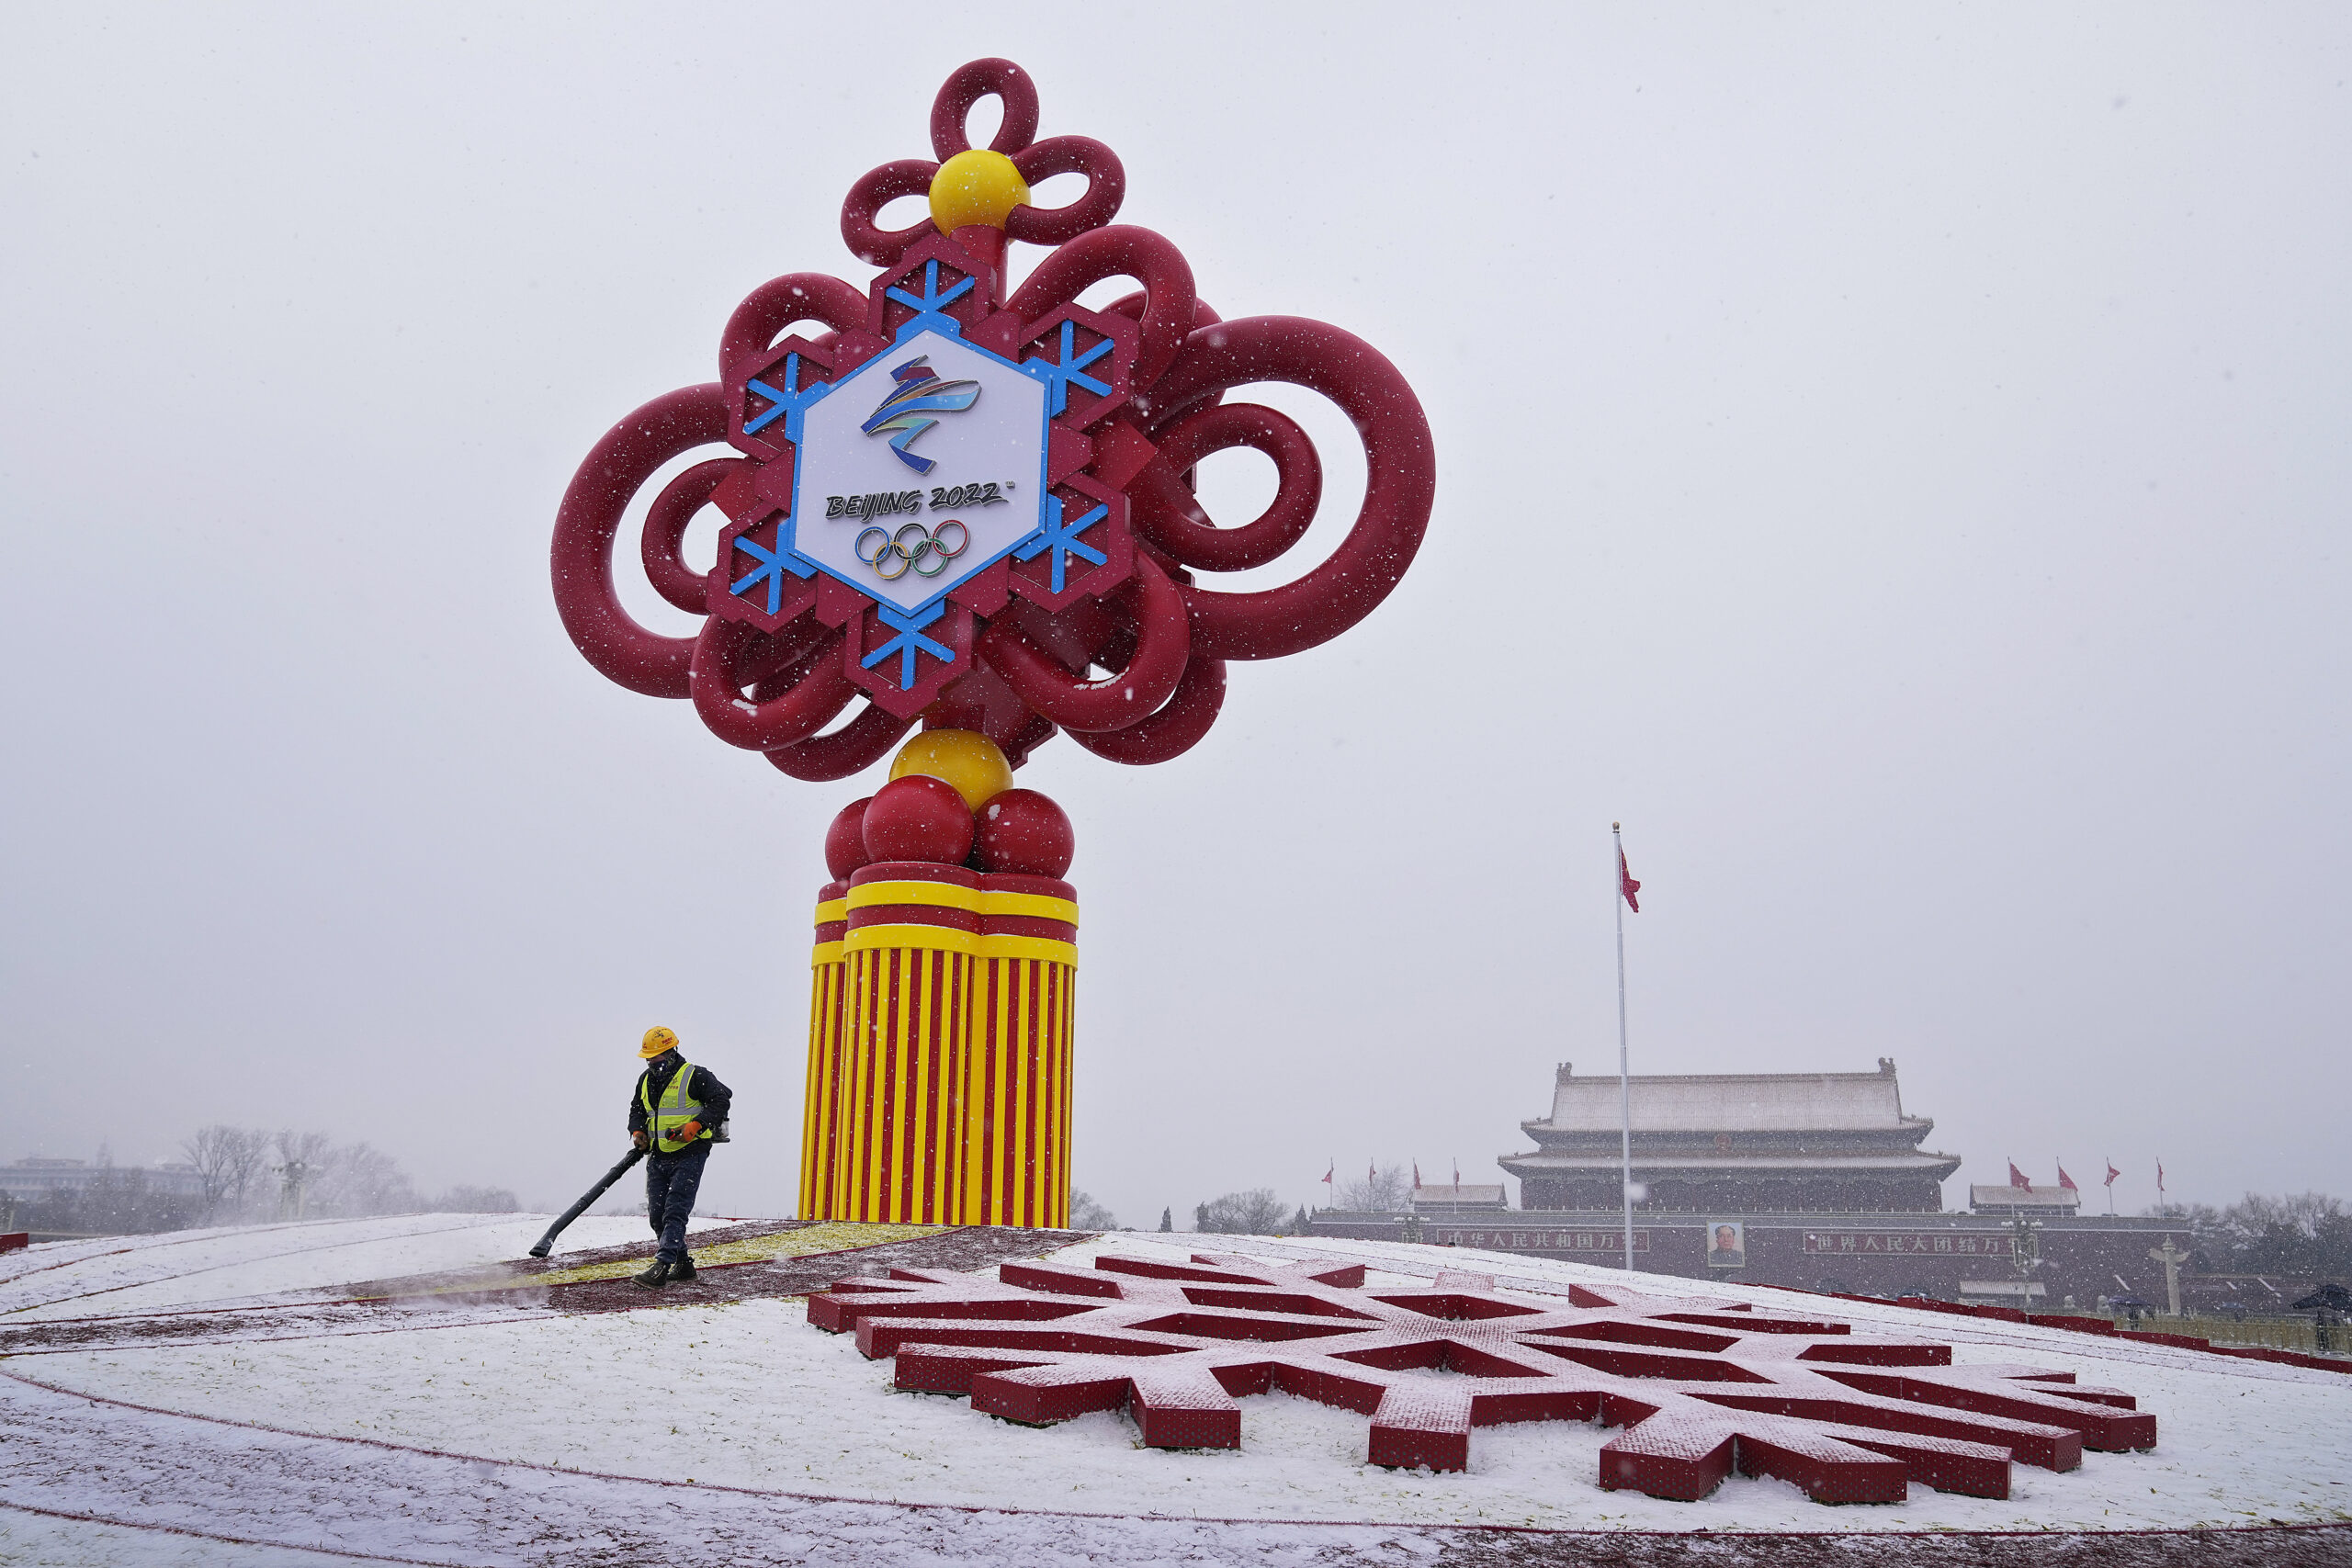 FILE - A worker wearing a face mask to protect from the coronavirus uses a blower to clean the snow on a decoration for the Beijing Winter Olympics Games on display at Tiananmen Square in Beijing, Jan. 20, 2022. The U.S. Olympic team's top doctor says all of the 200-plus athletes heading to Beijing for the Winter Games next month are fully vaccinated, and not a single one asked for a medical exemption. (AP Photo/Andy Wong, File)